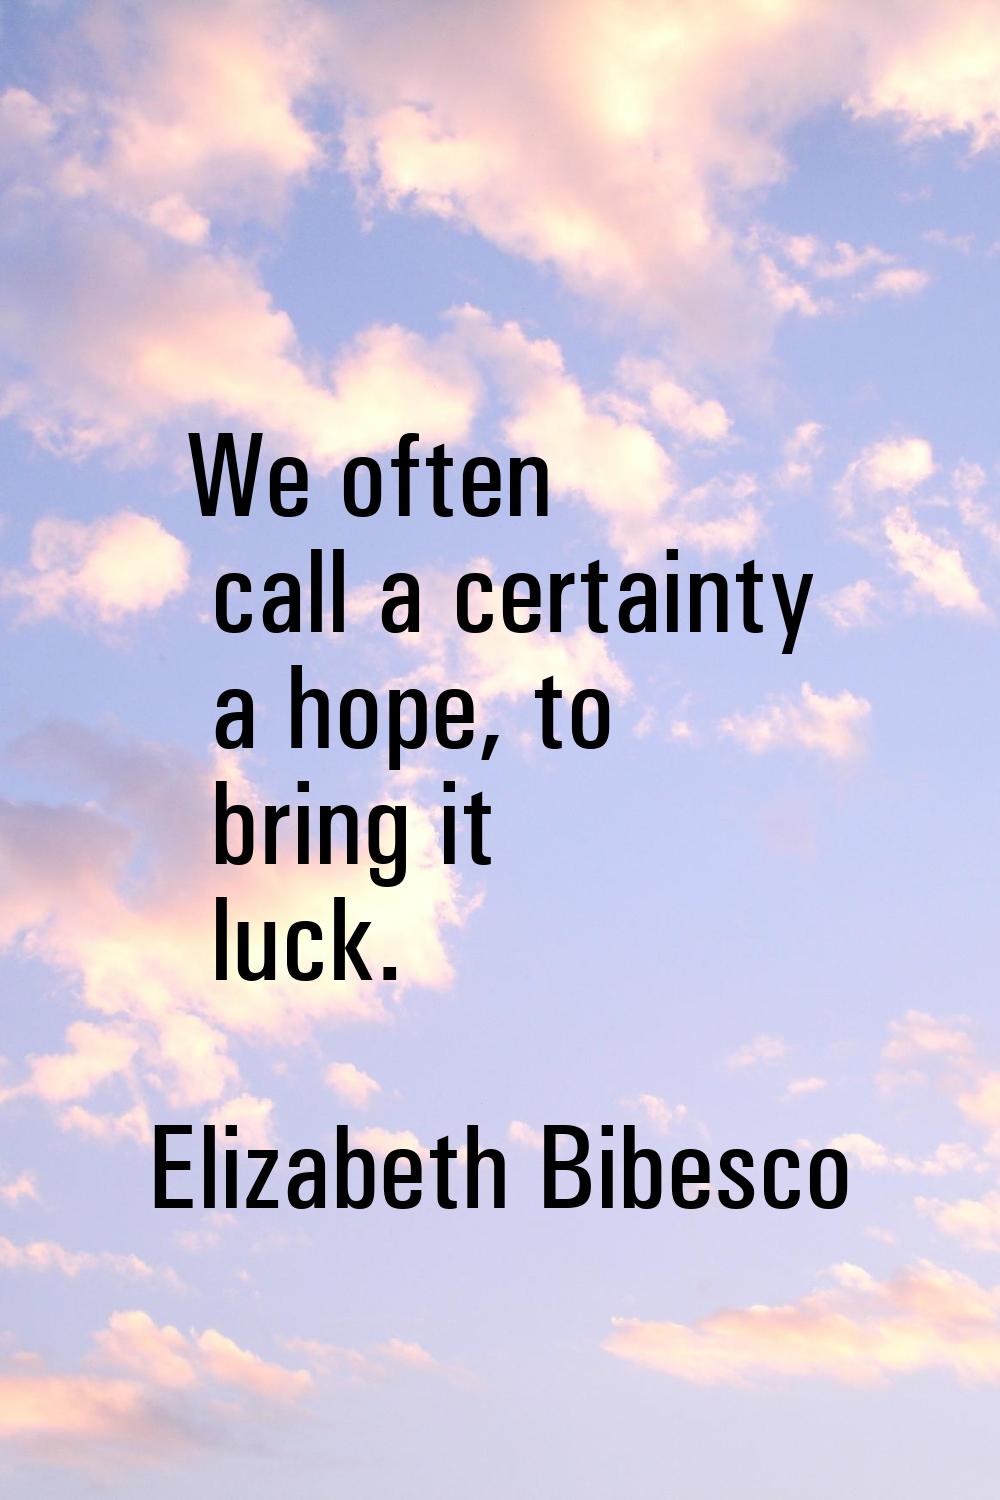 We often call a certainty a hope, to bring it luck.